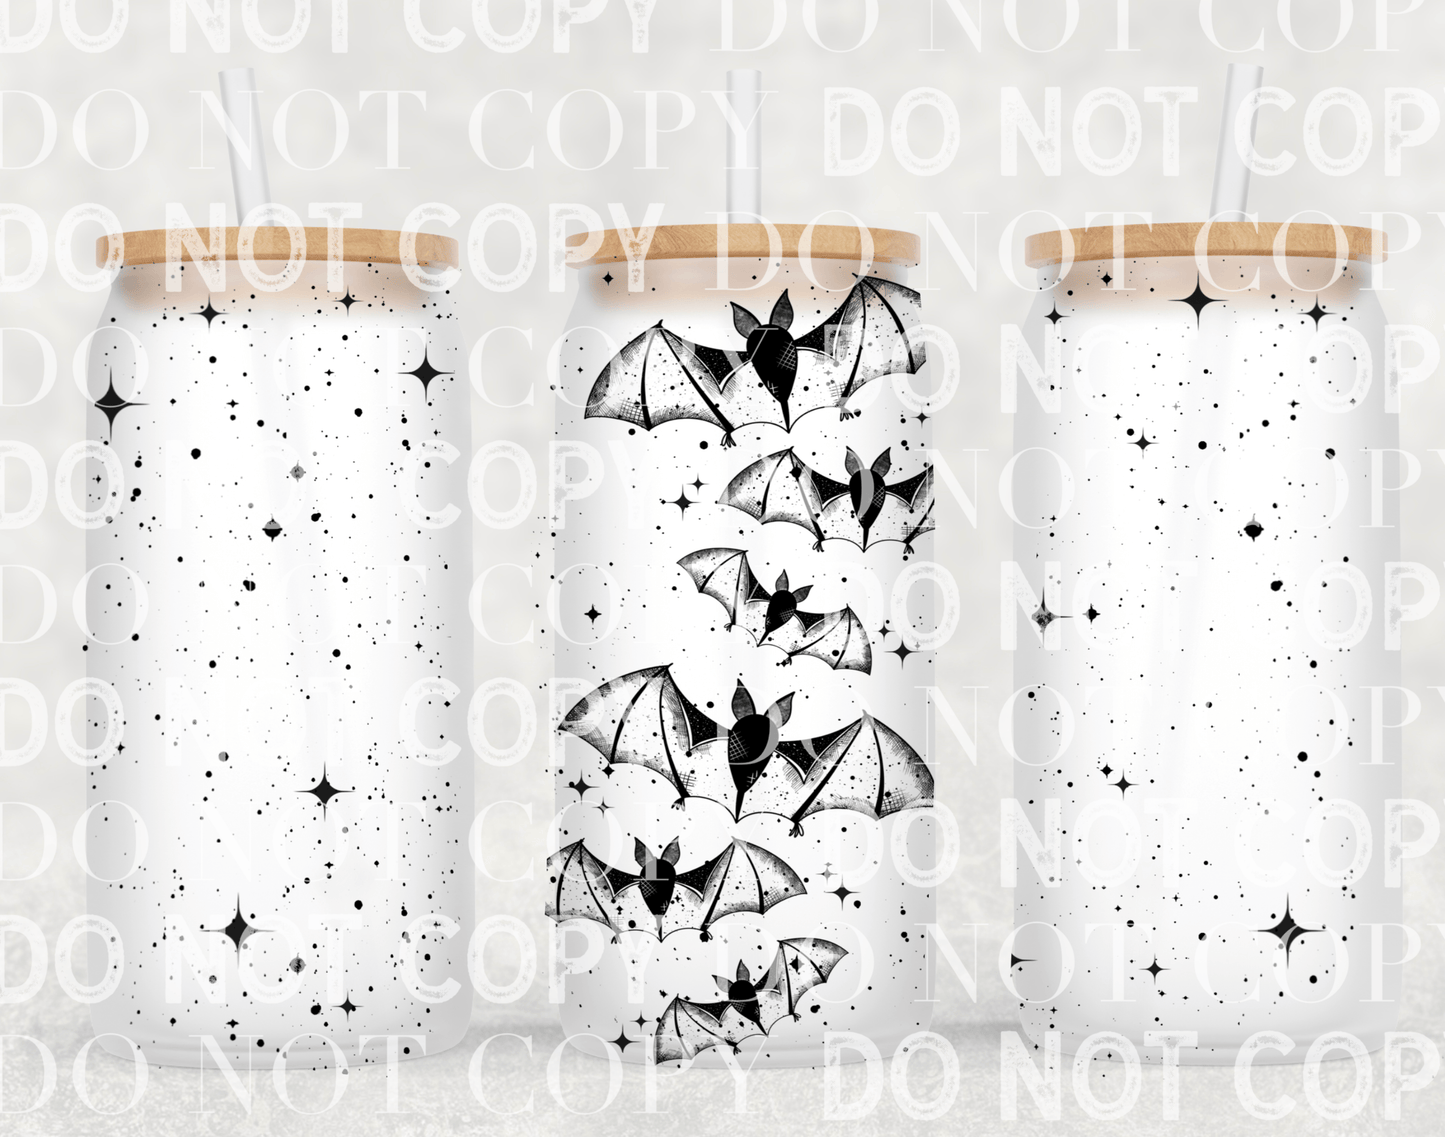 Bat tumbler wrap sized for 16 oz frosted cup from mother tumbler  Cerra's Shop Creates   